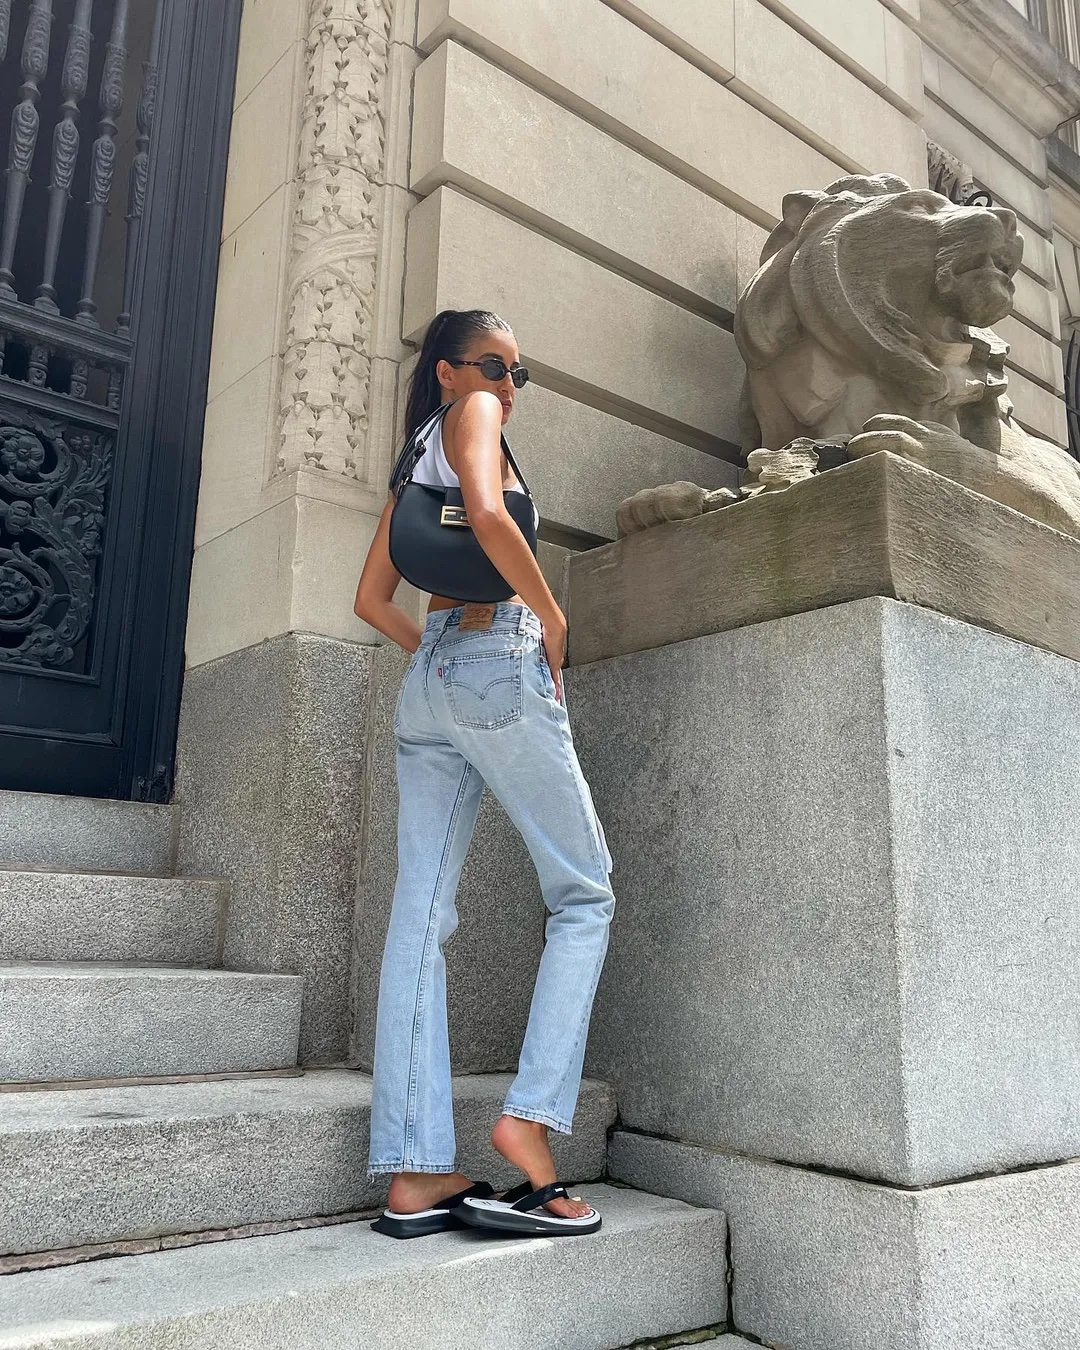 14 NYC Outfits That Make Hot Summer Weather Look Good | Who What Wear